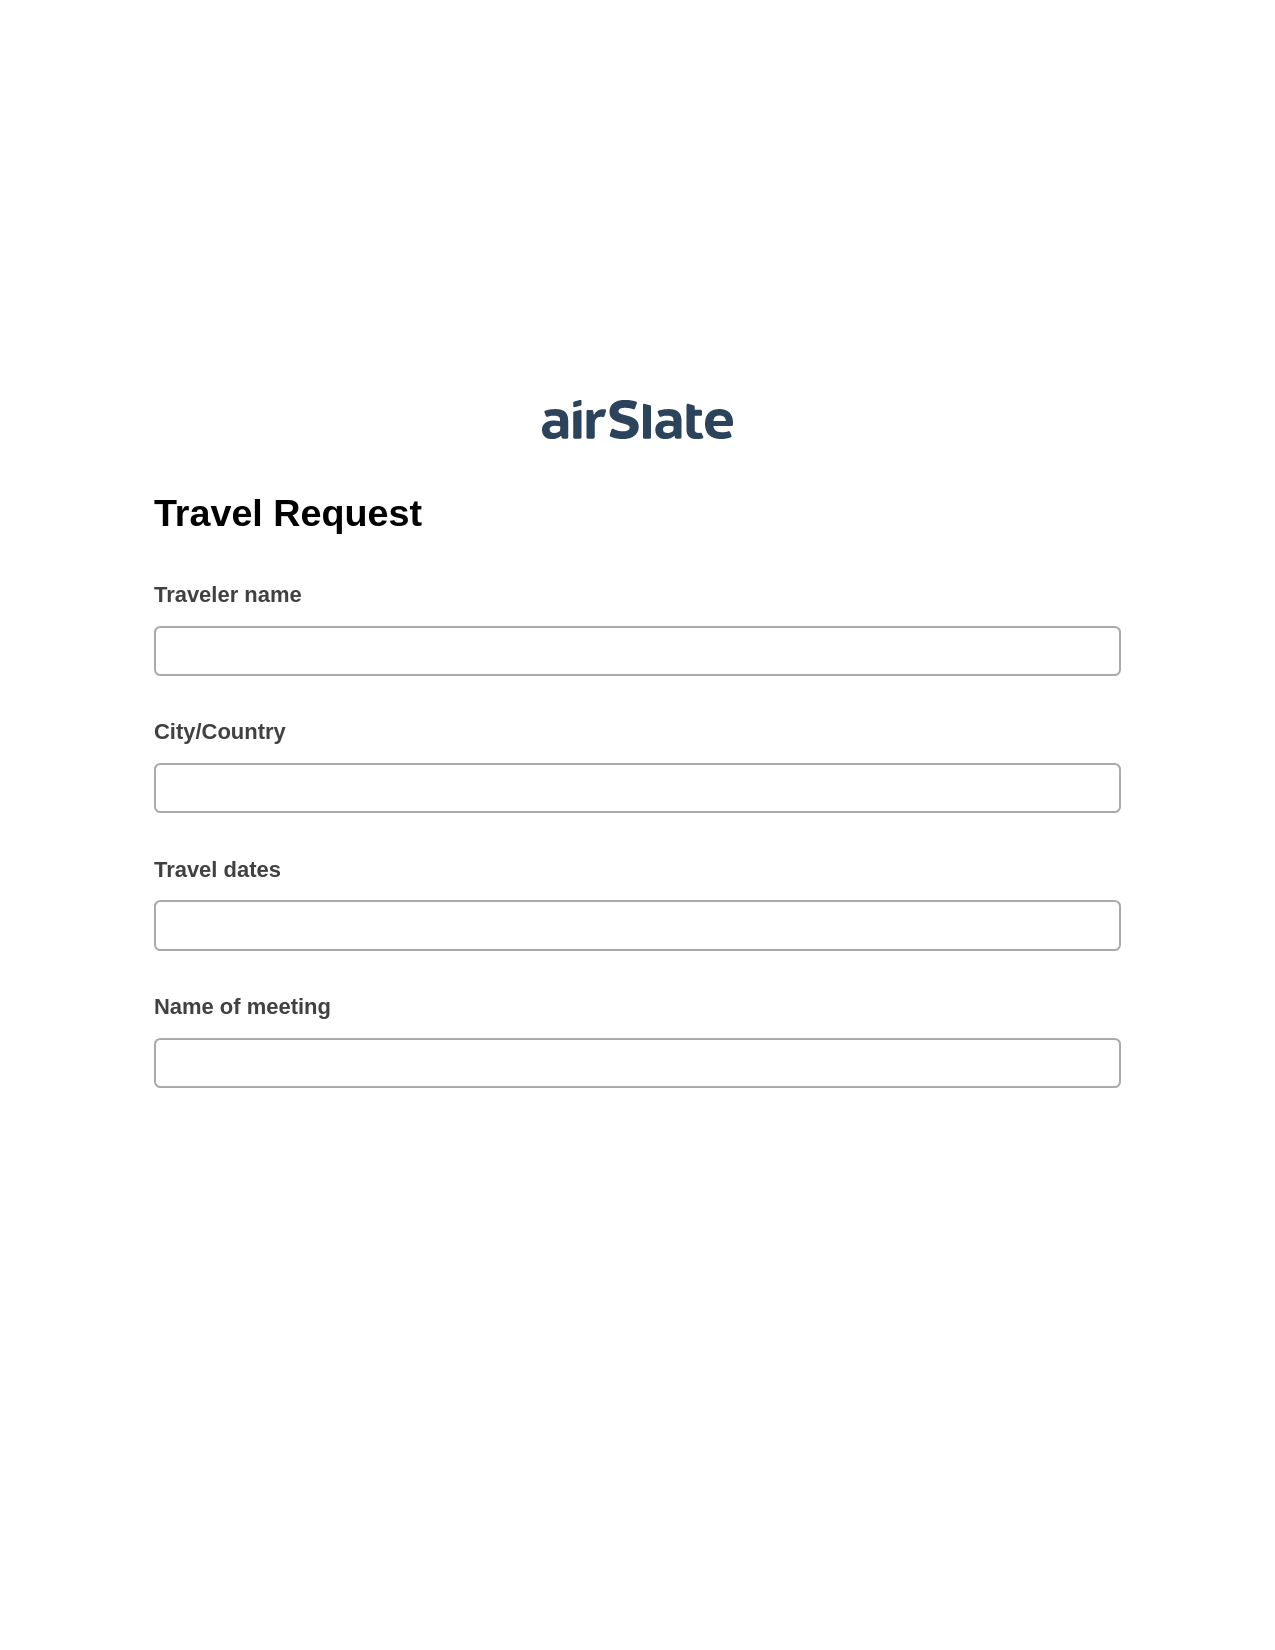 Travel Request Pre-fill from CSV File Bot, Pre-fill with Custom Data Bot, Export to NetSuite Record Bot